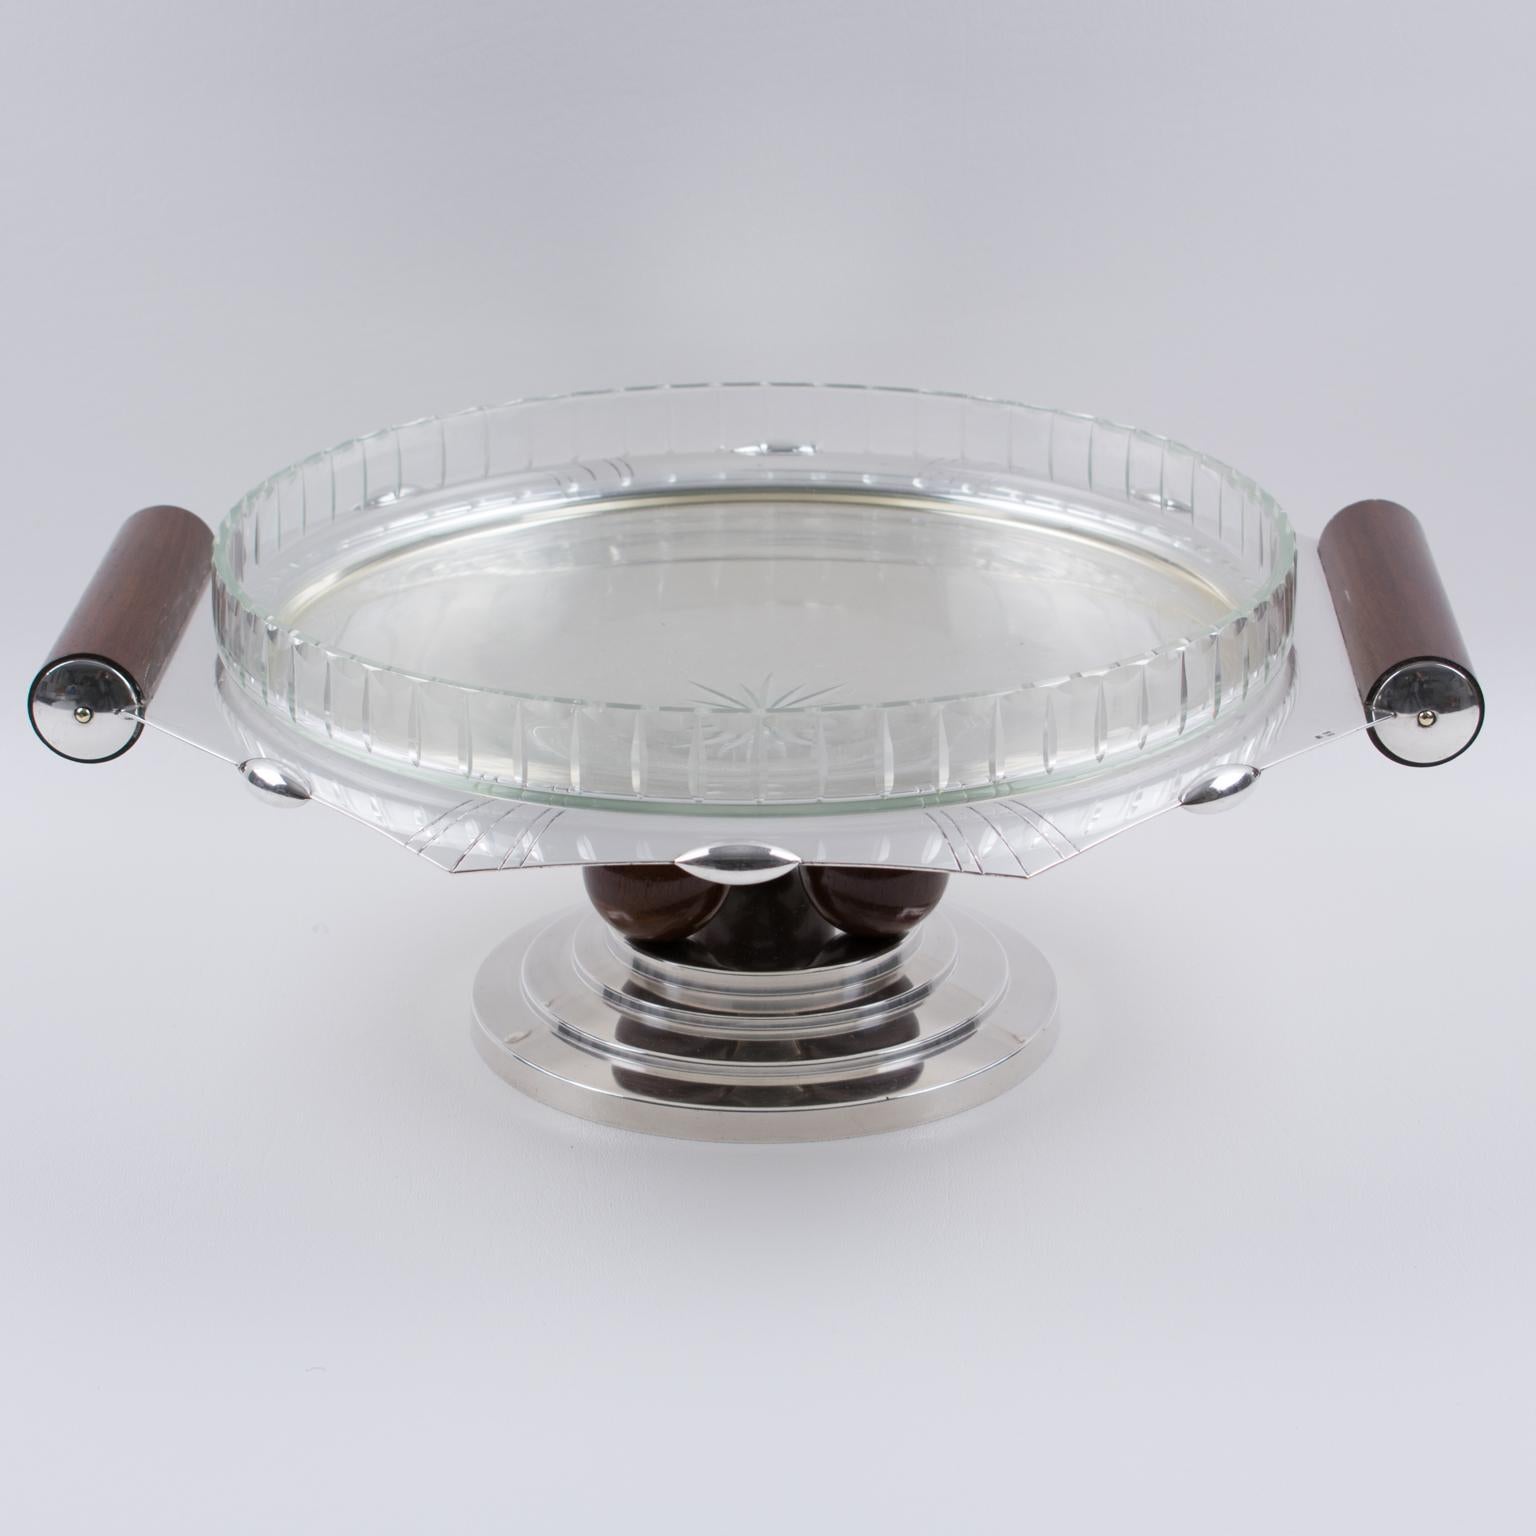 Superb timeless and Classic Art Deco polished silver plate pedestal bowl, great centerpiece or serving dish by silversmith Roux & Marquiand, France. Modernist design with round stepped bottom and three Macassar balls base, funnel shaped dish with